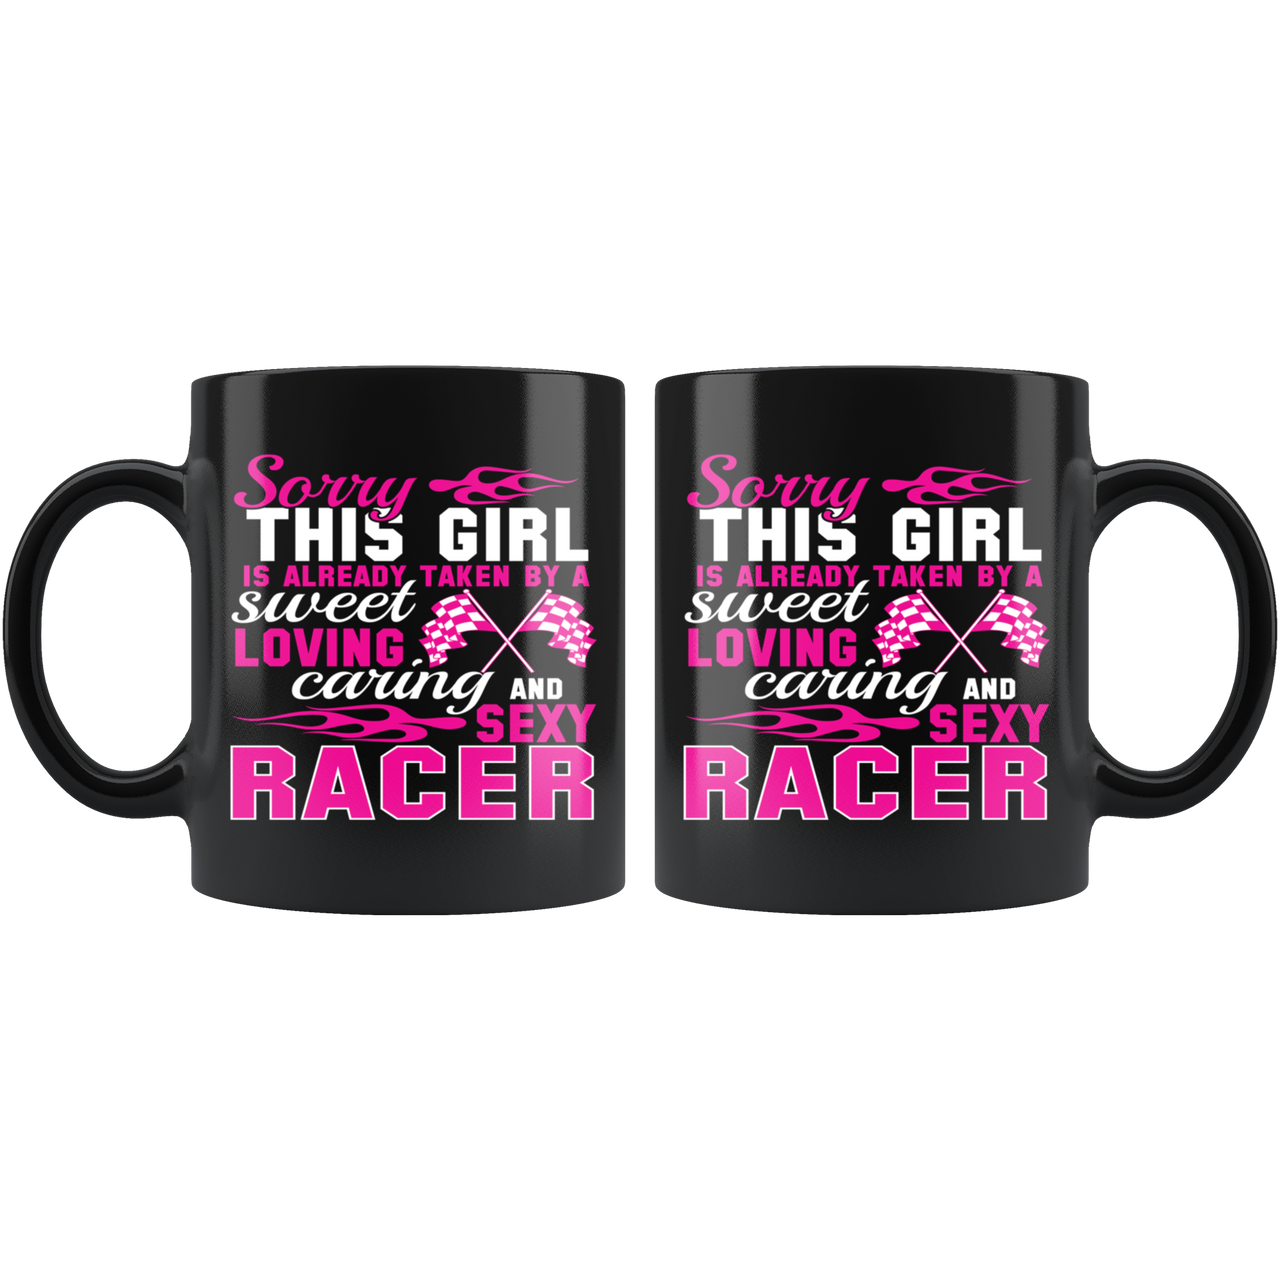 Sorry This Girl Is Already Taken By A Sweet Loving And Sexy Racer Mug!